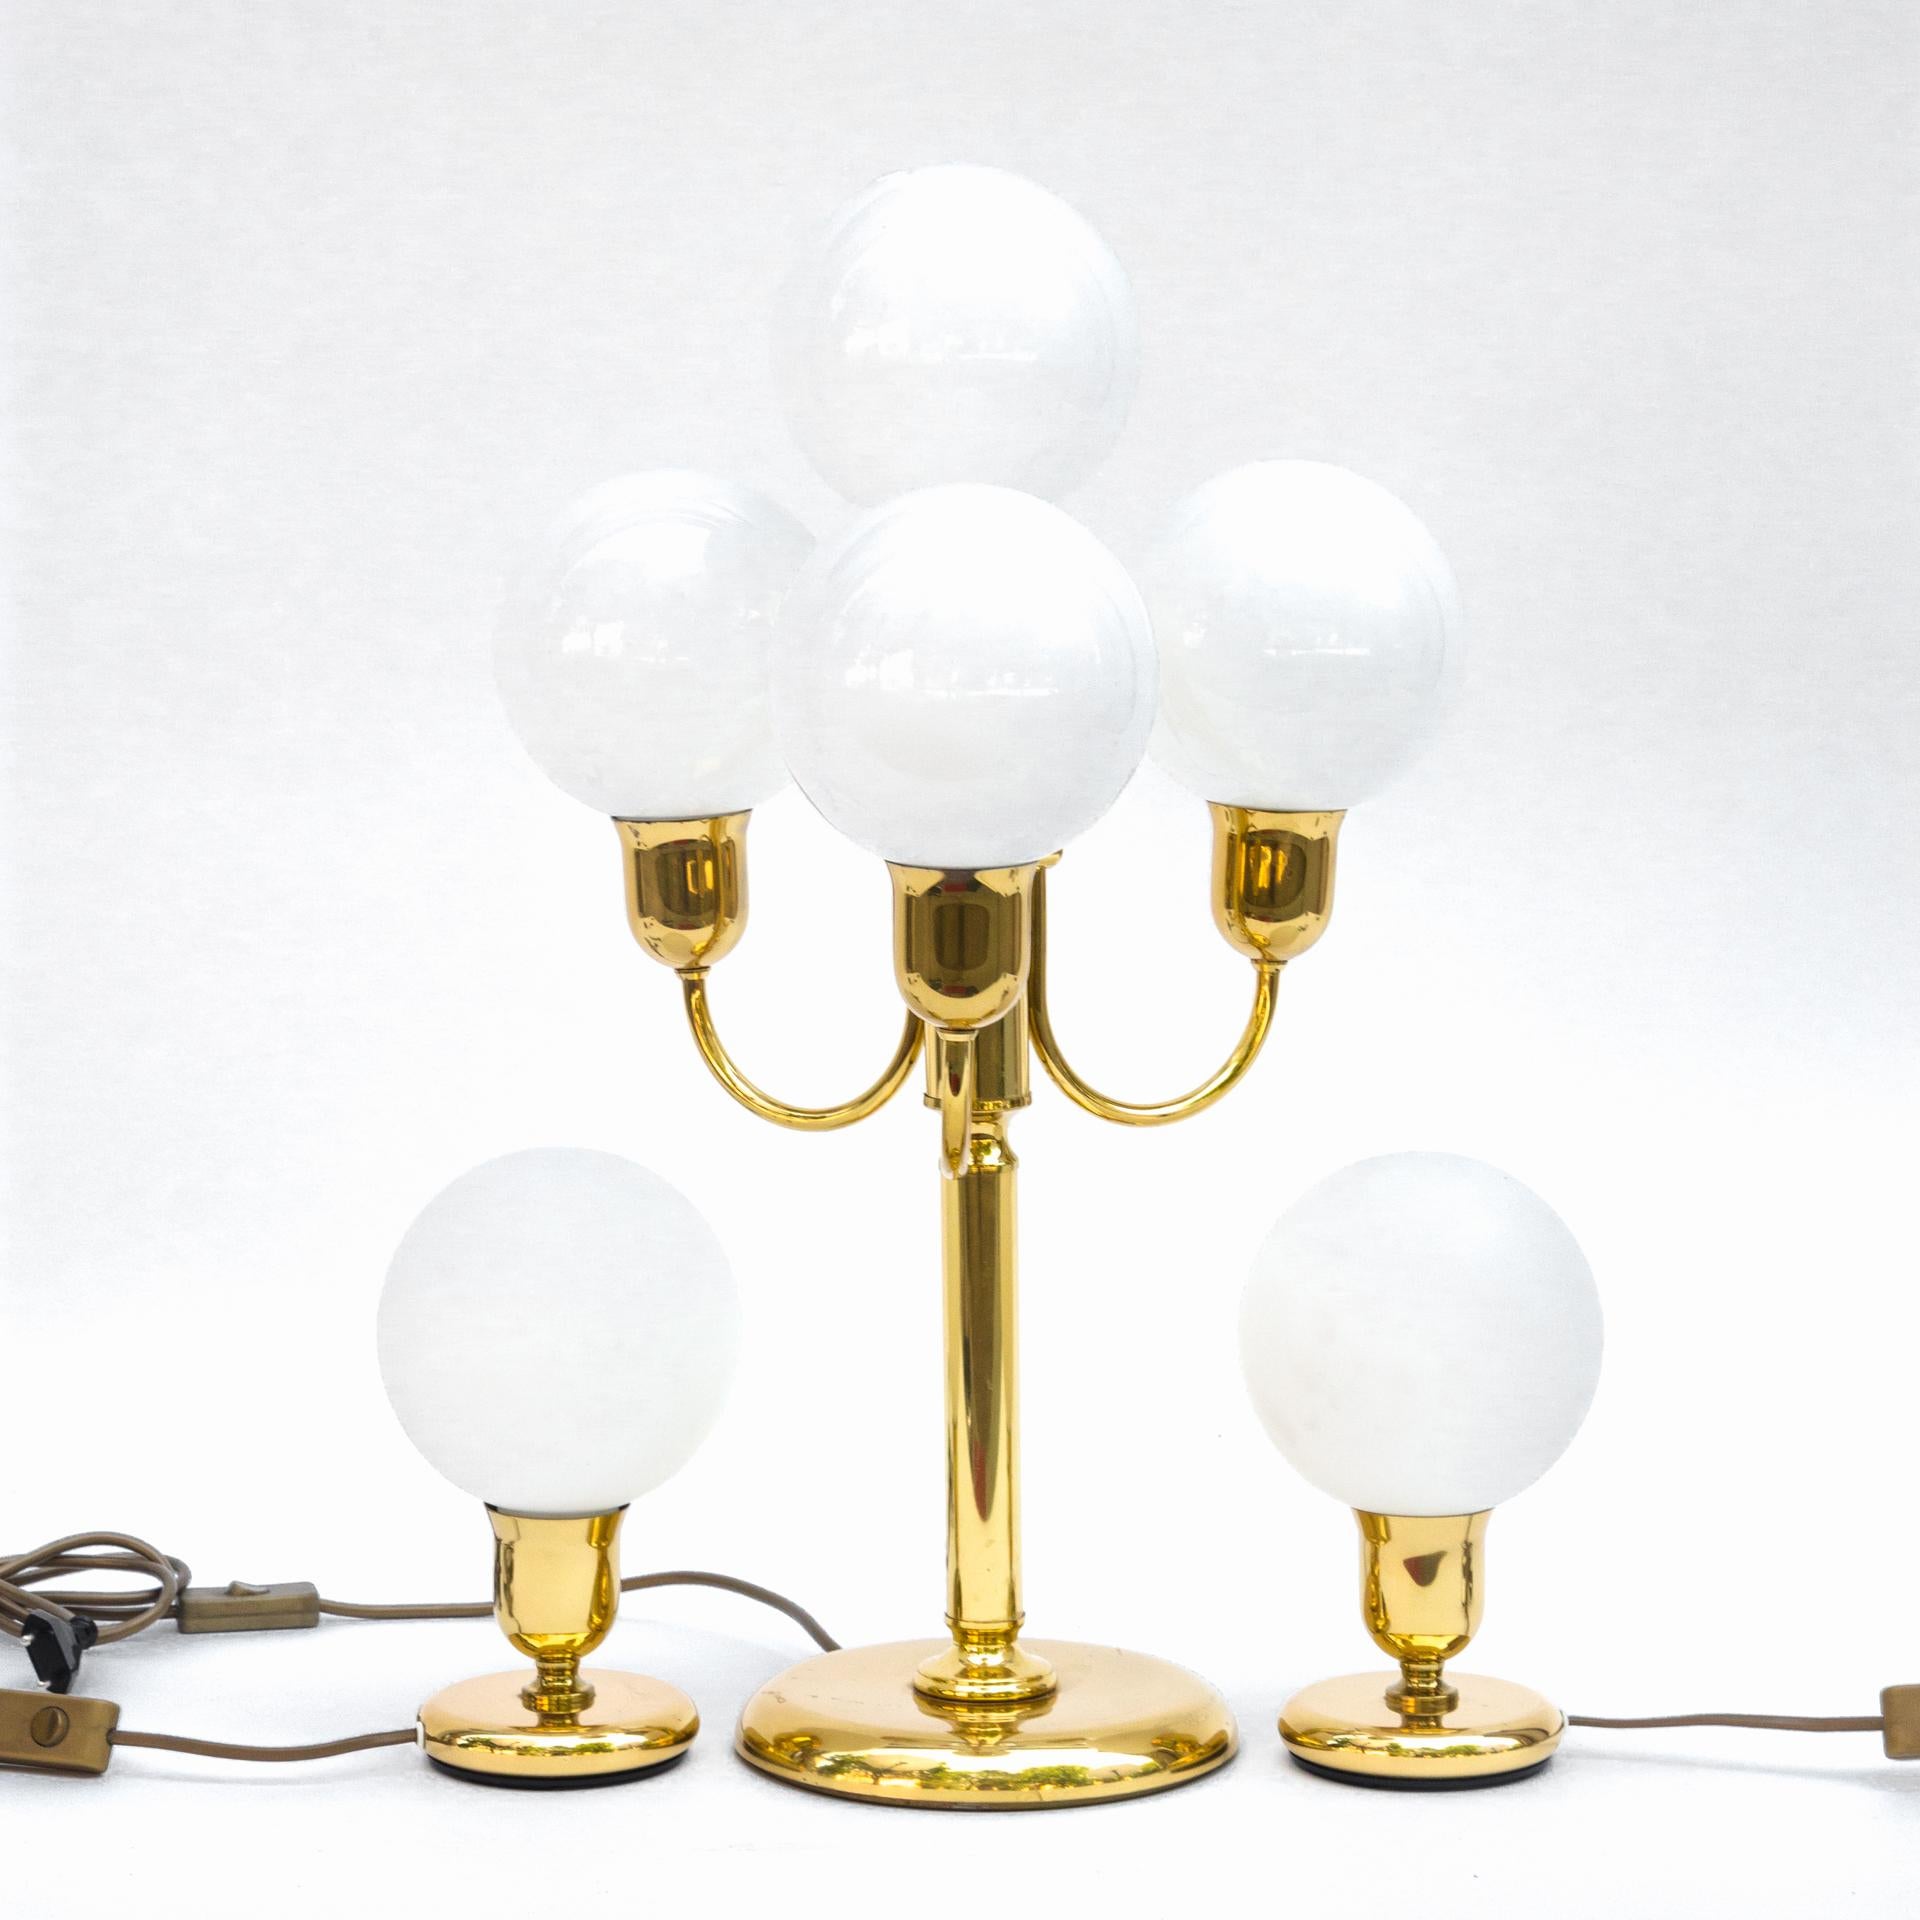 European Pair of Spherical Gold Table Lamps in the Art Deco Style